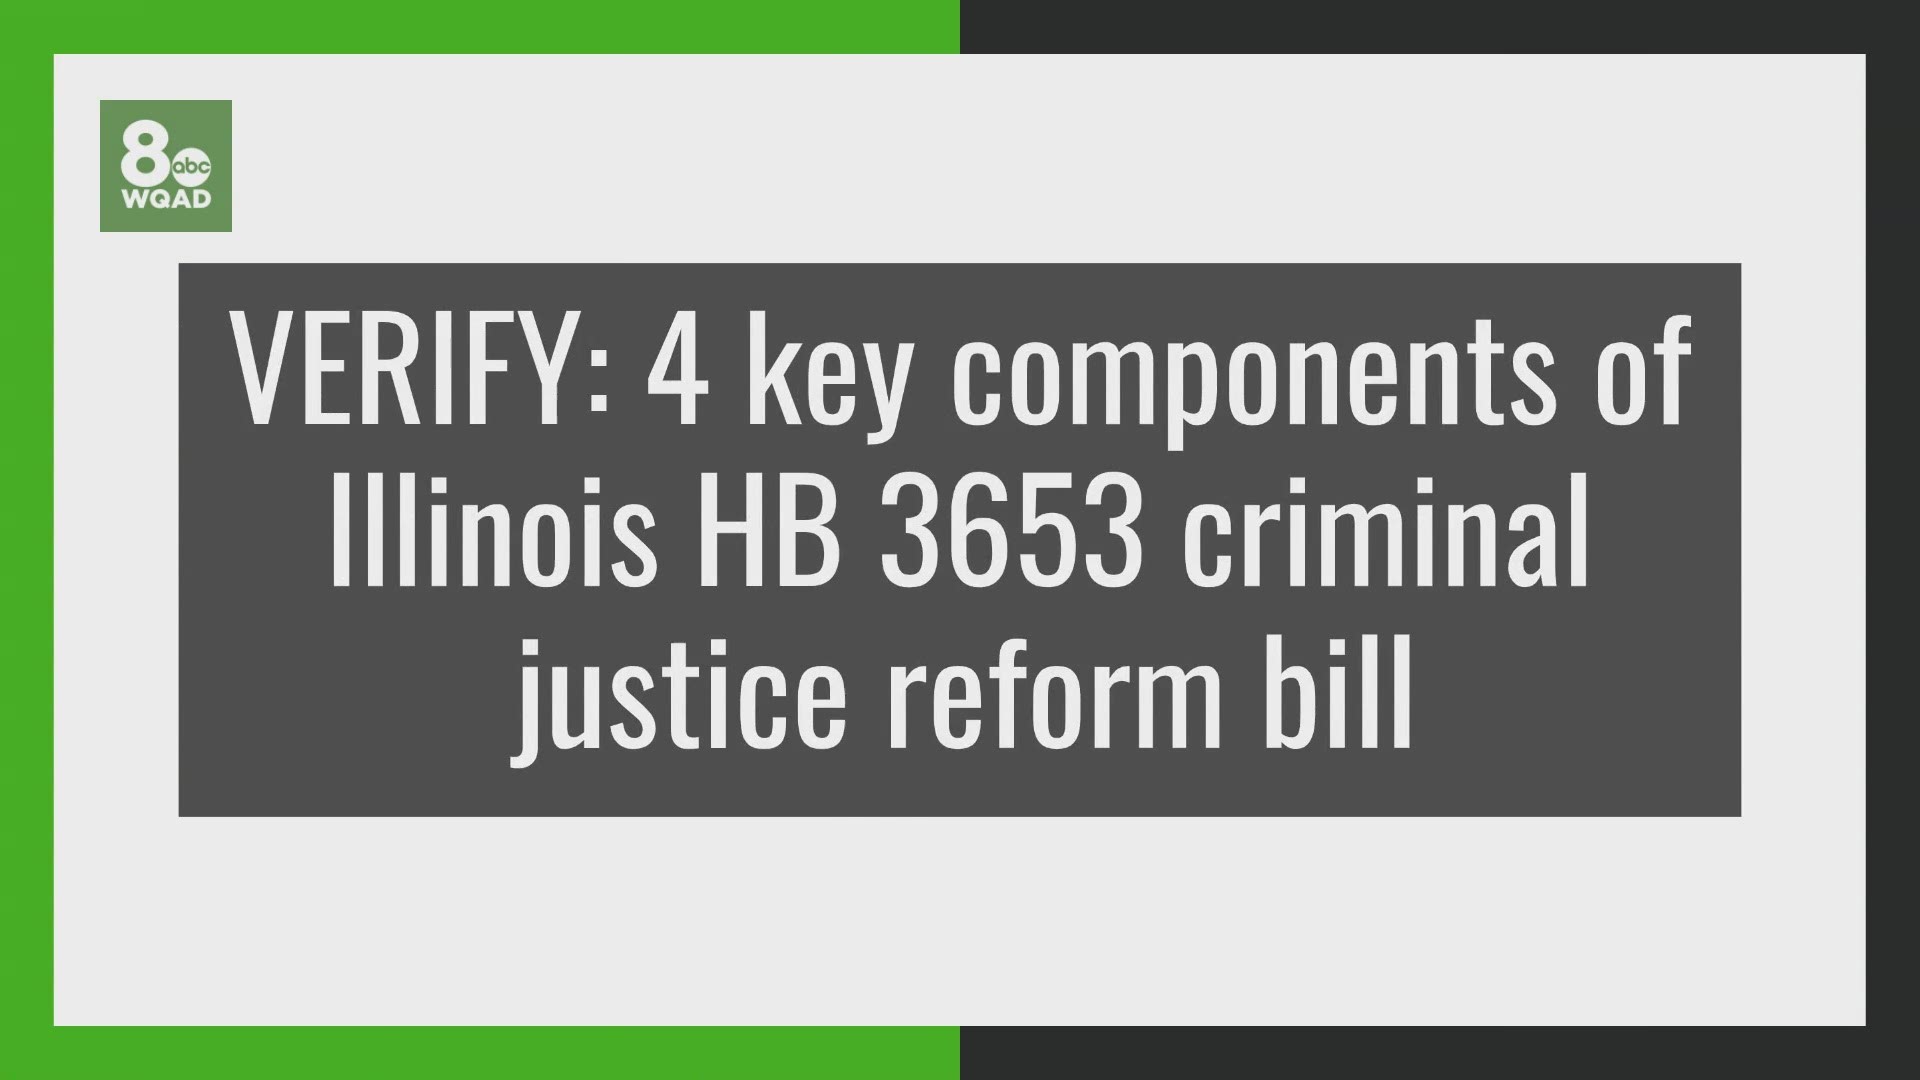 Illinois HB 3653 is a criminal justice reform bill that is expected to be signed by Gov. J.B. Pritzker. Here are four key components of the bill verified.